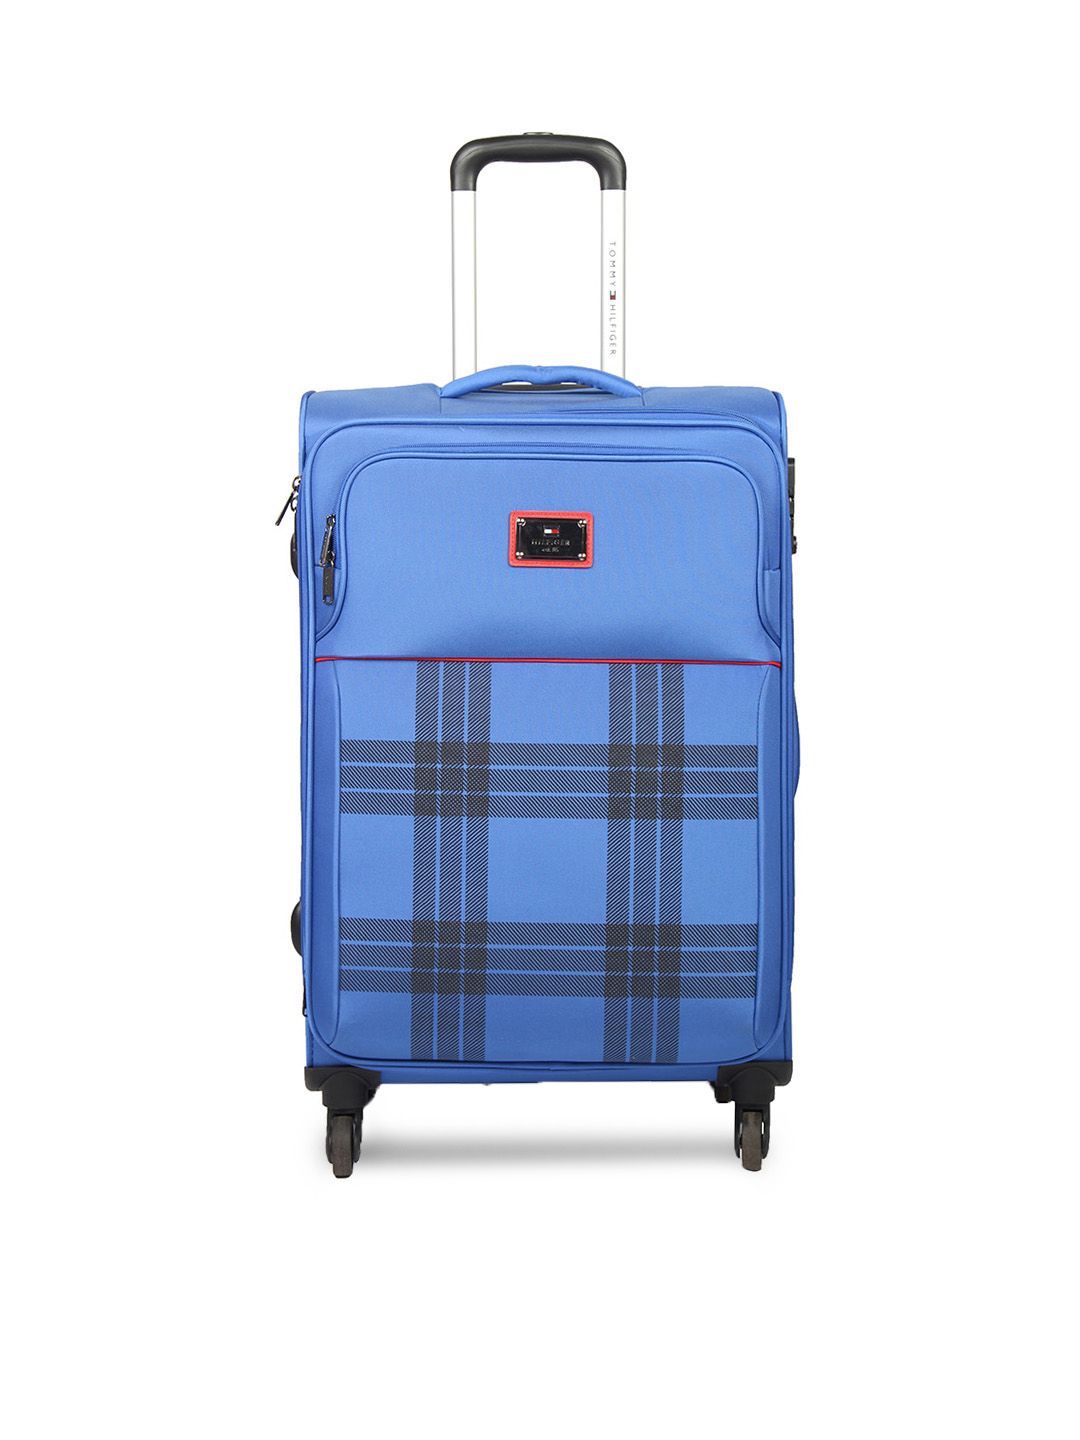 Tommy Hilfiger Blue Trolley Bag Price in India